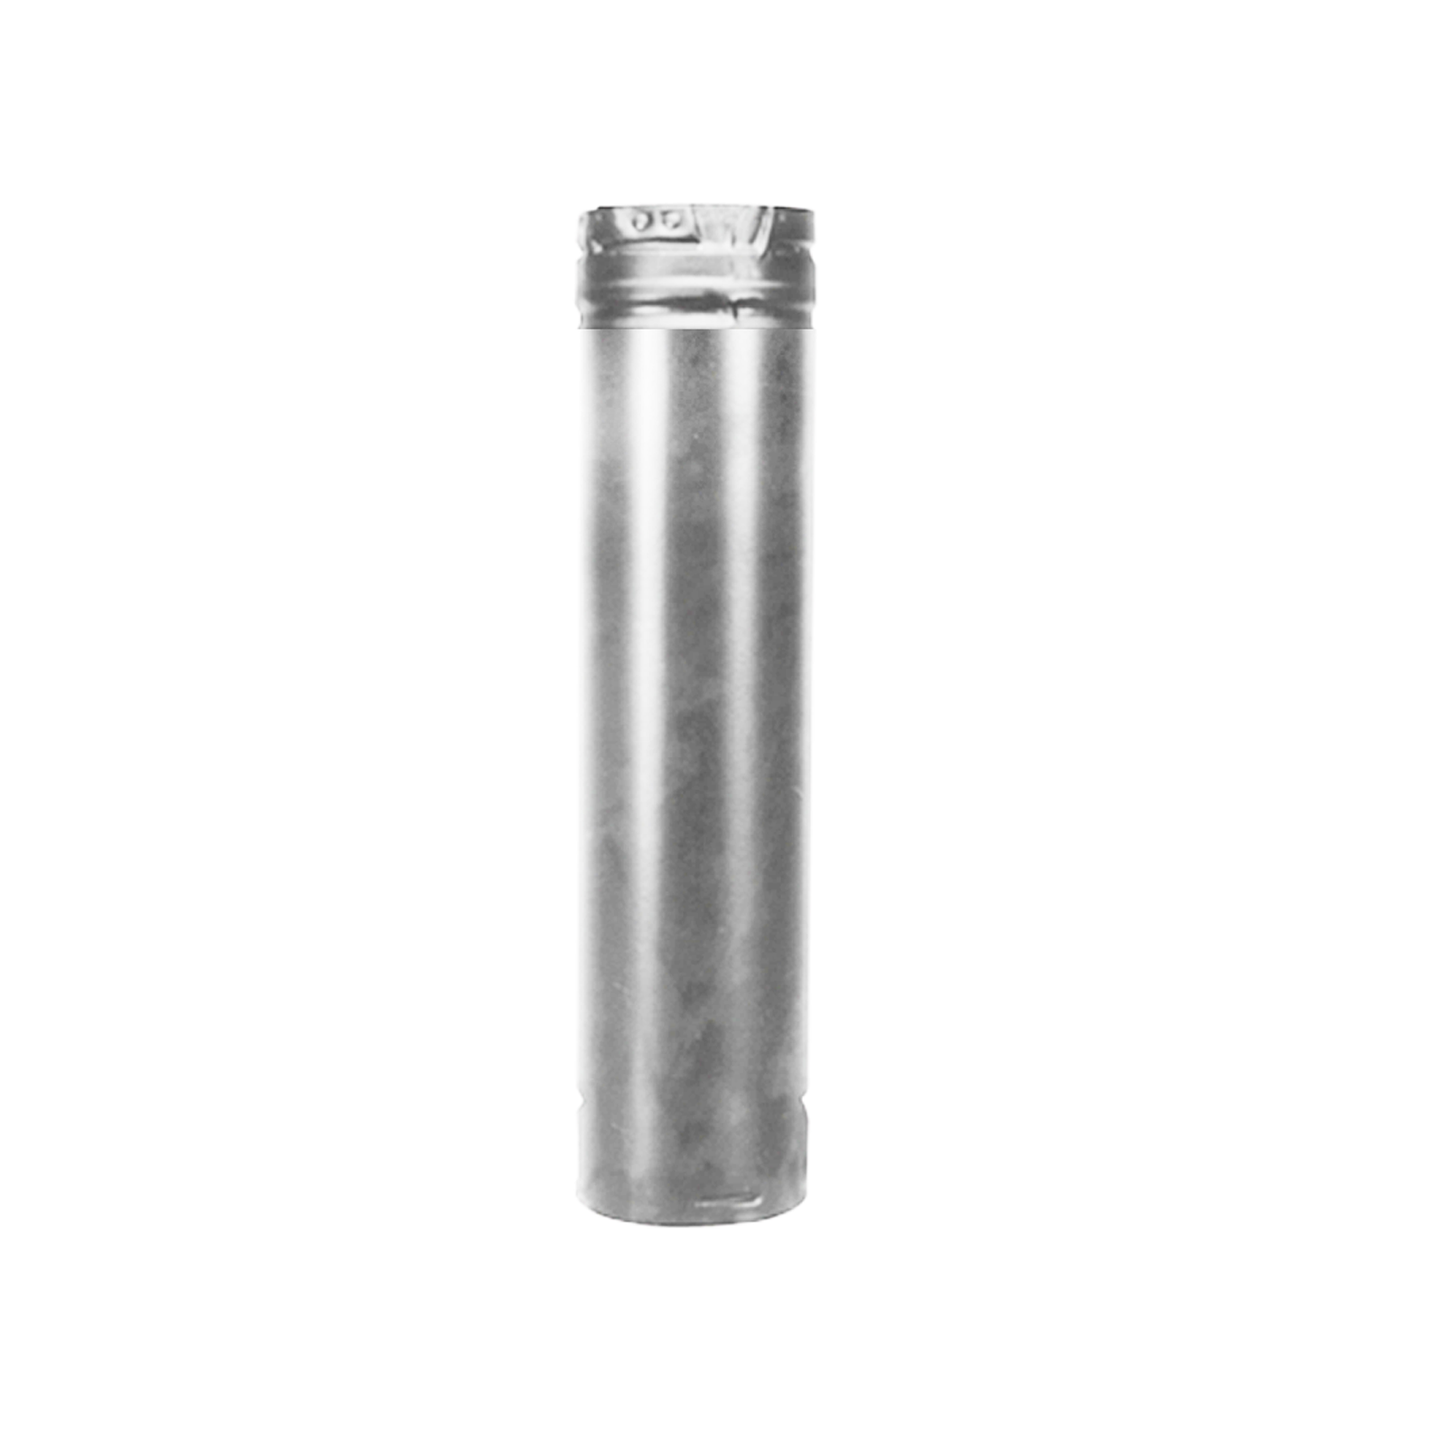 DuraVent Pellet Vent Pro 12" Straight Length Pipe (SS) | 4PVP-12SS